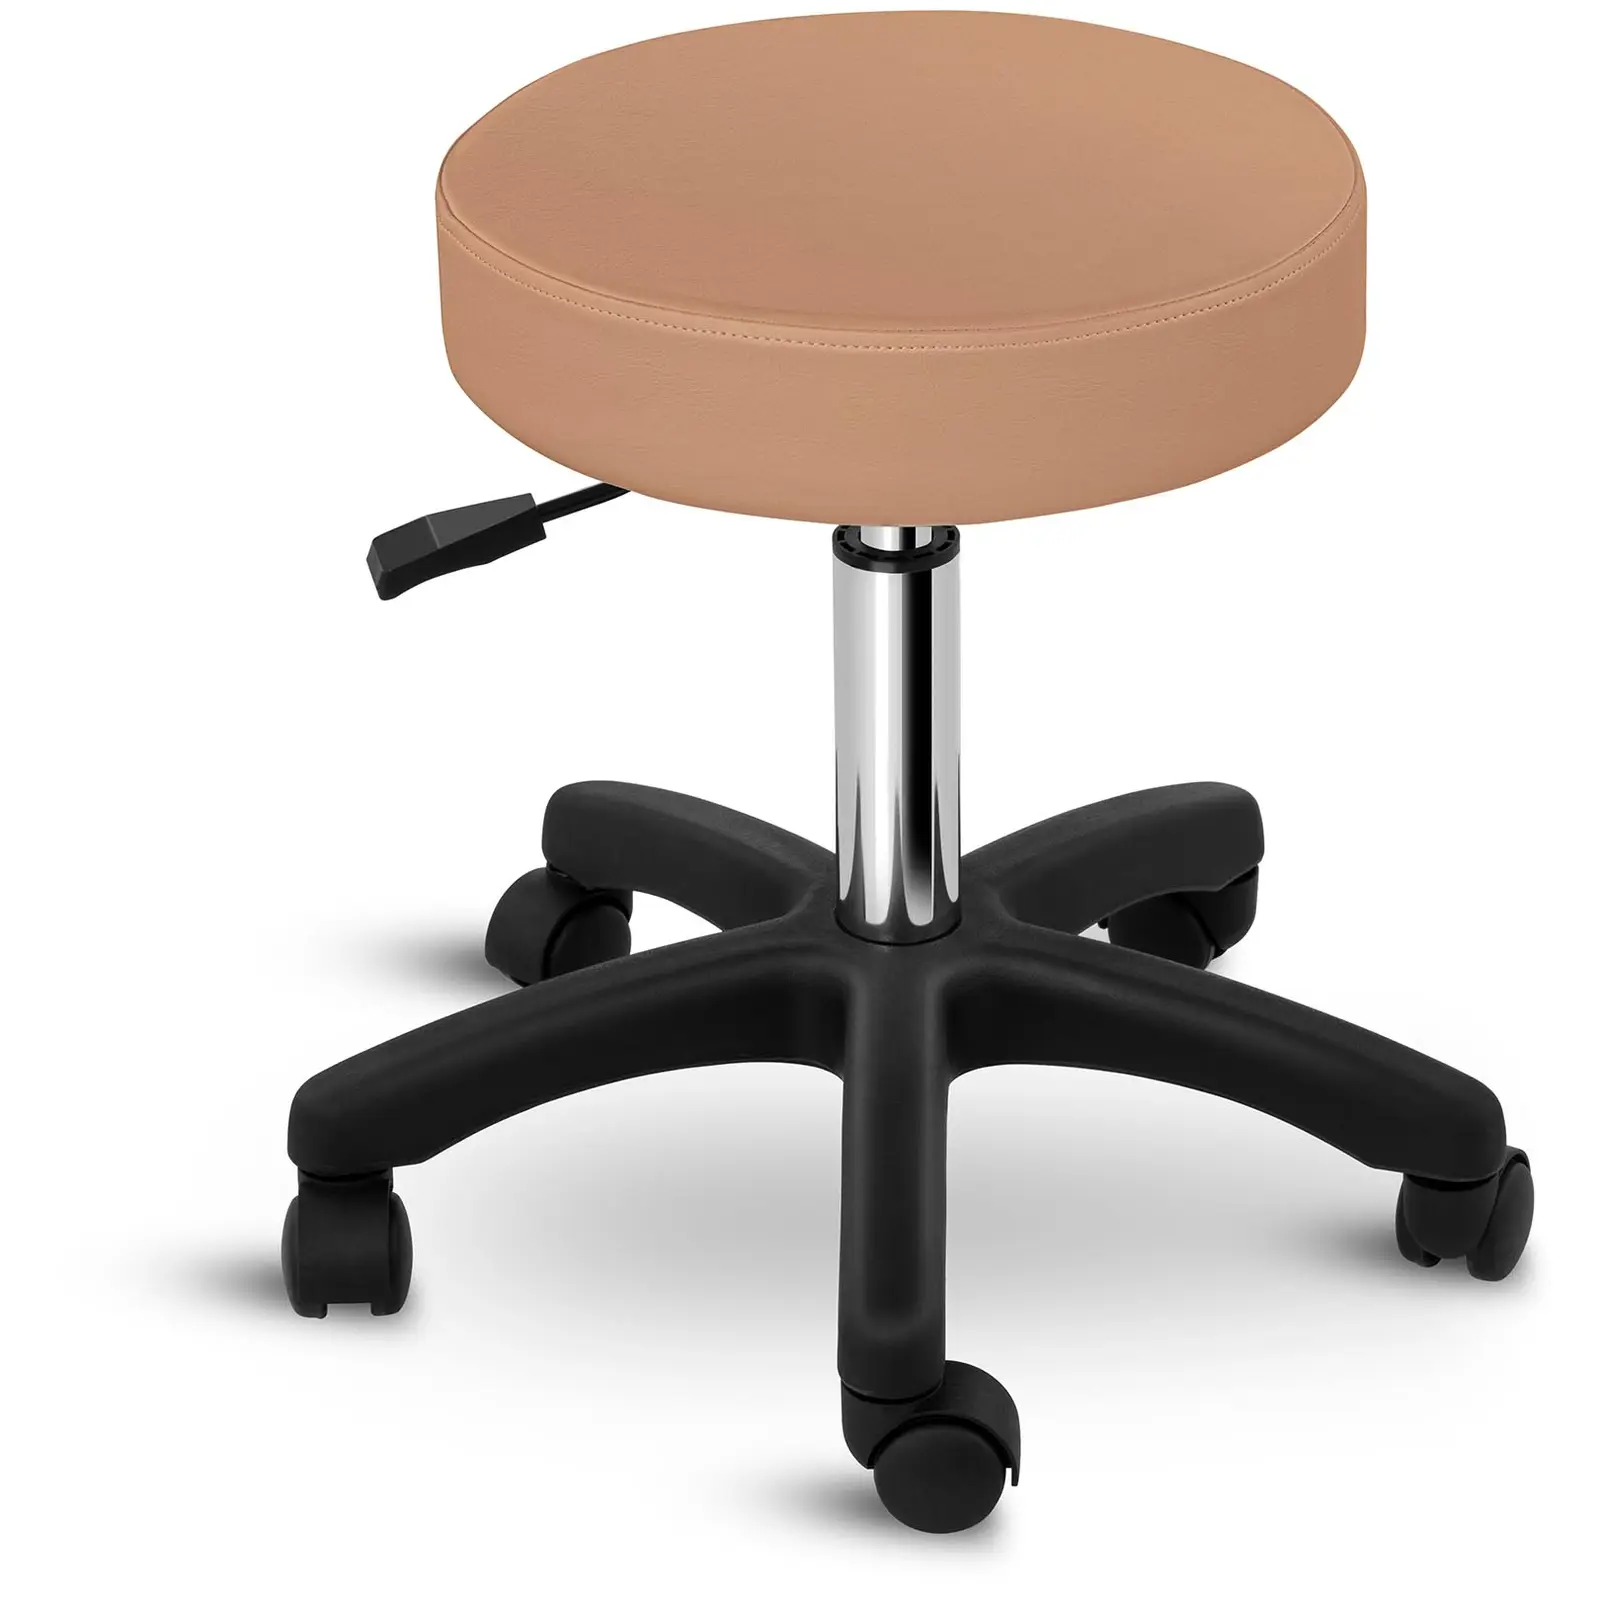 Work Stool - 450 - 580 mm - 150 kg - Cappuccino